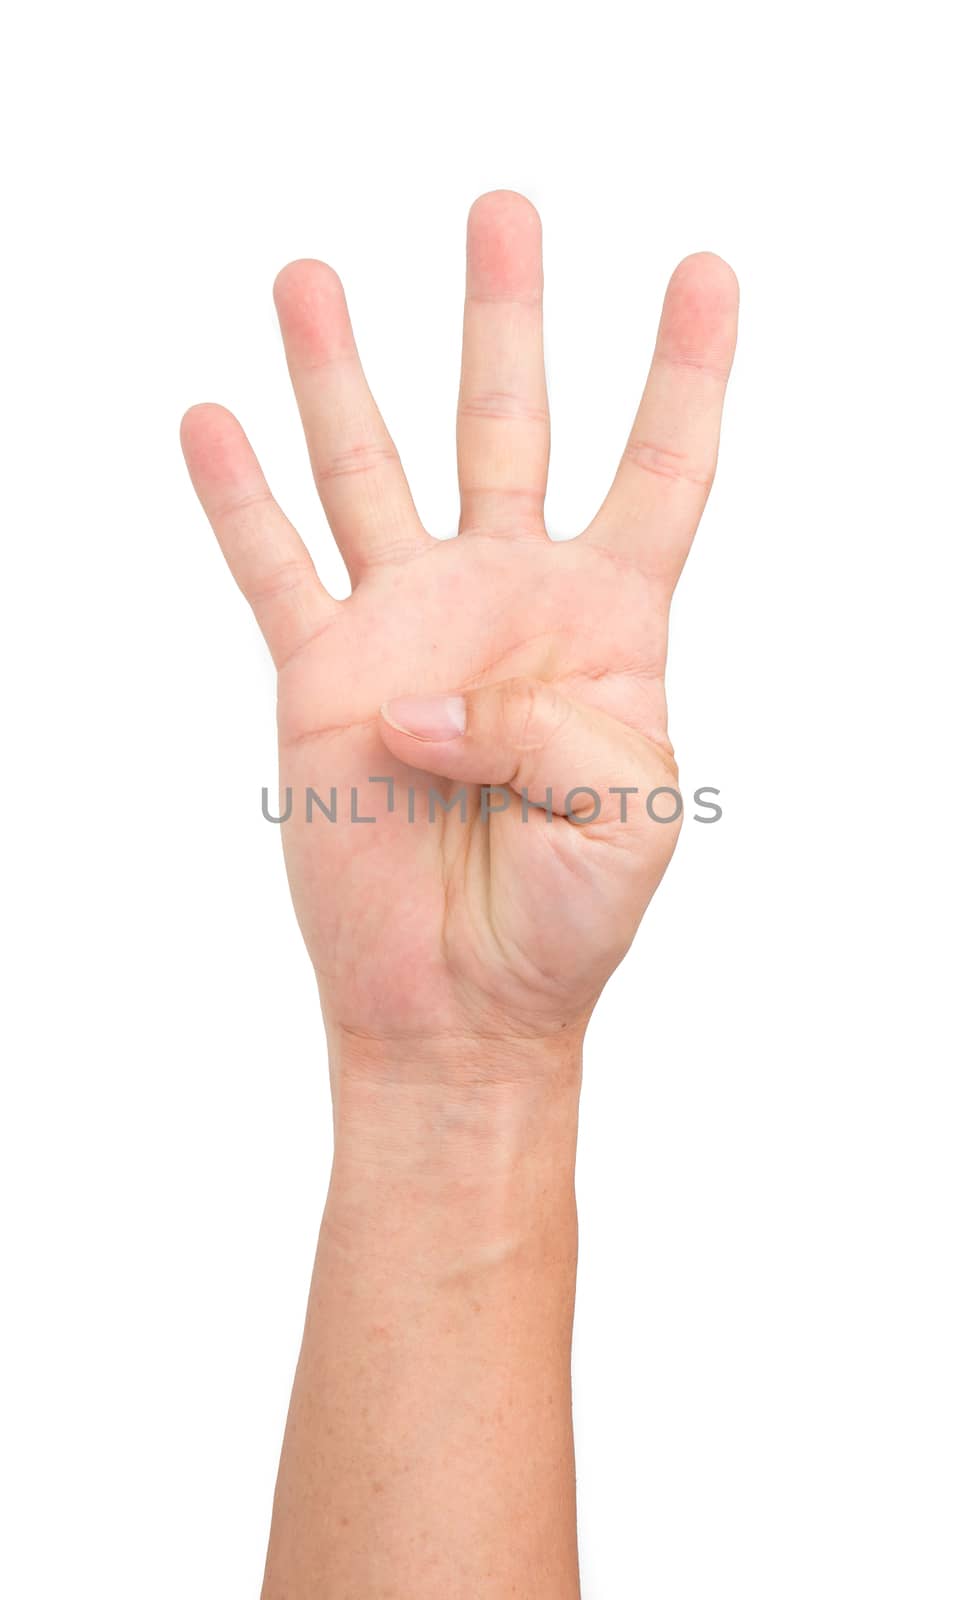 hand gesture isolated on white background